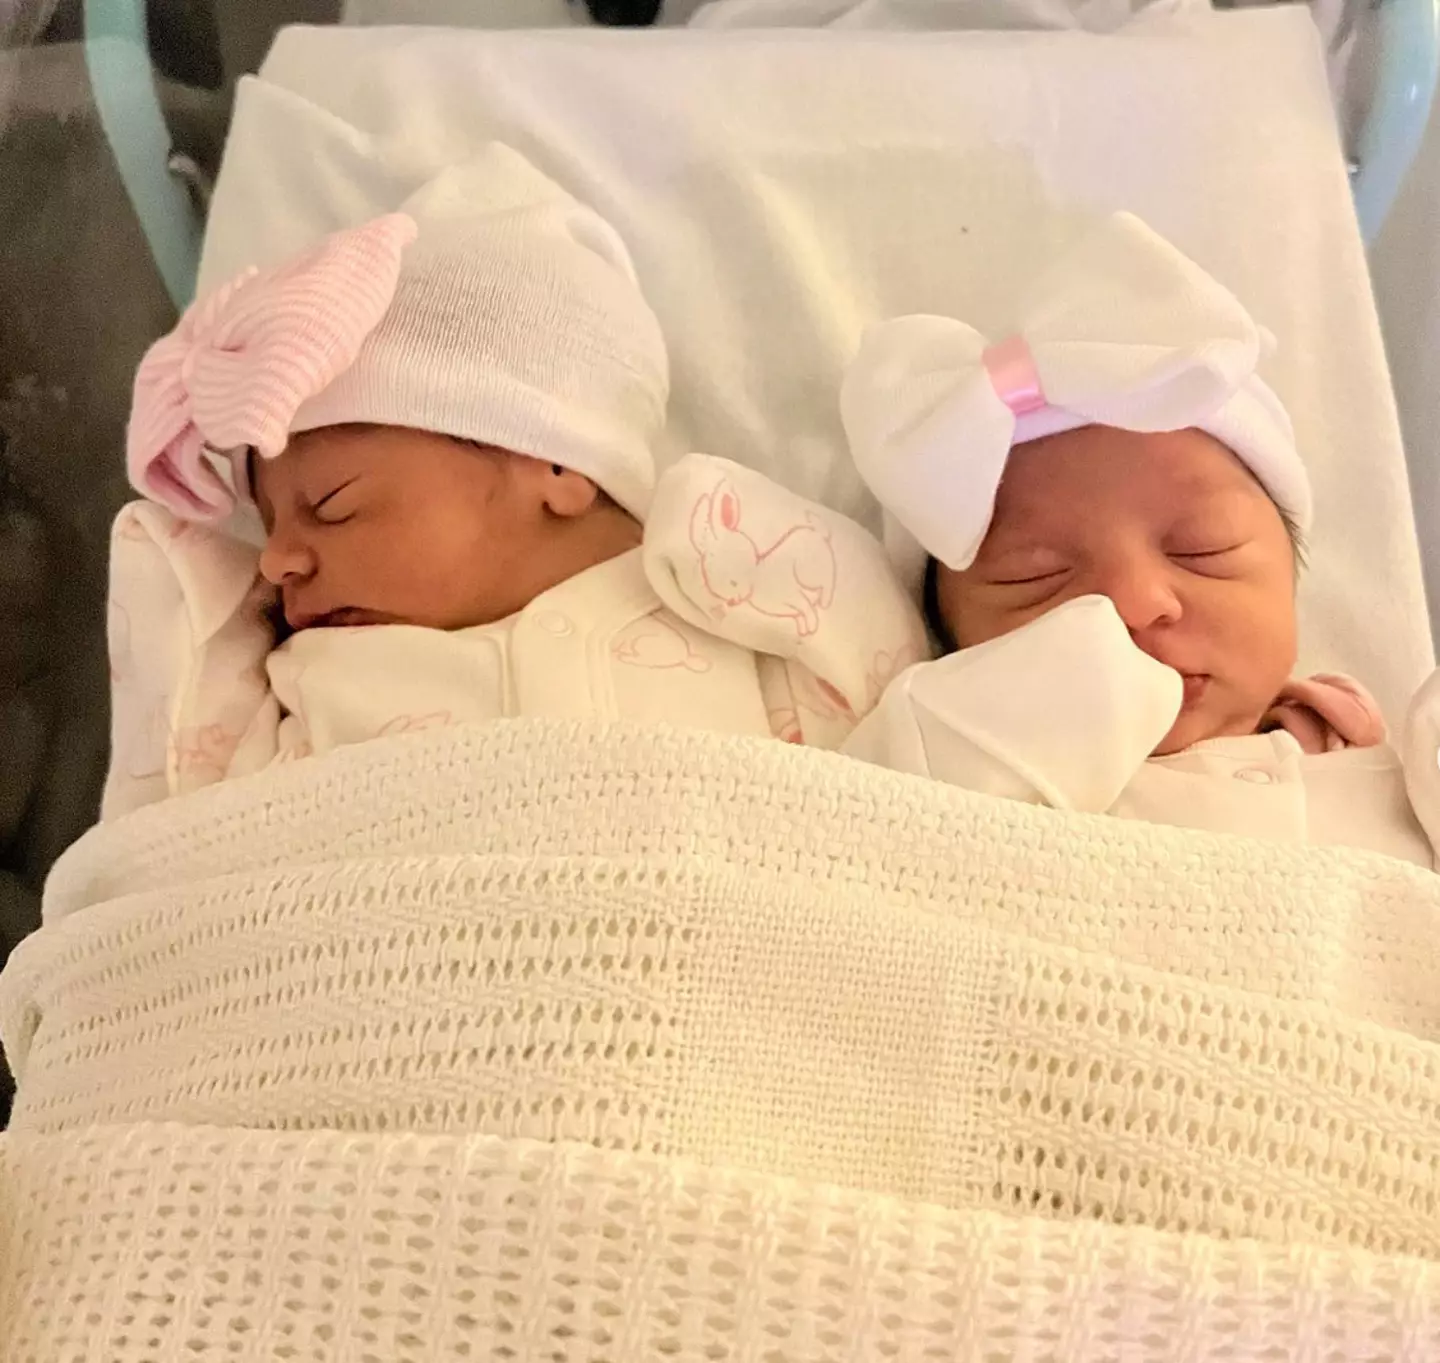 The couple have welcomed twin girls.